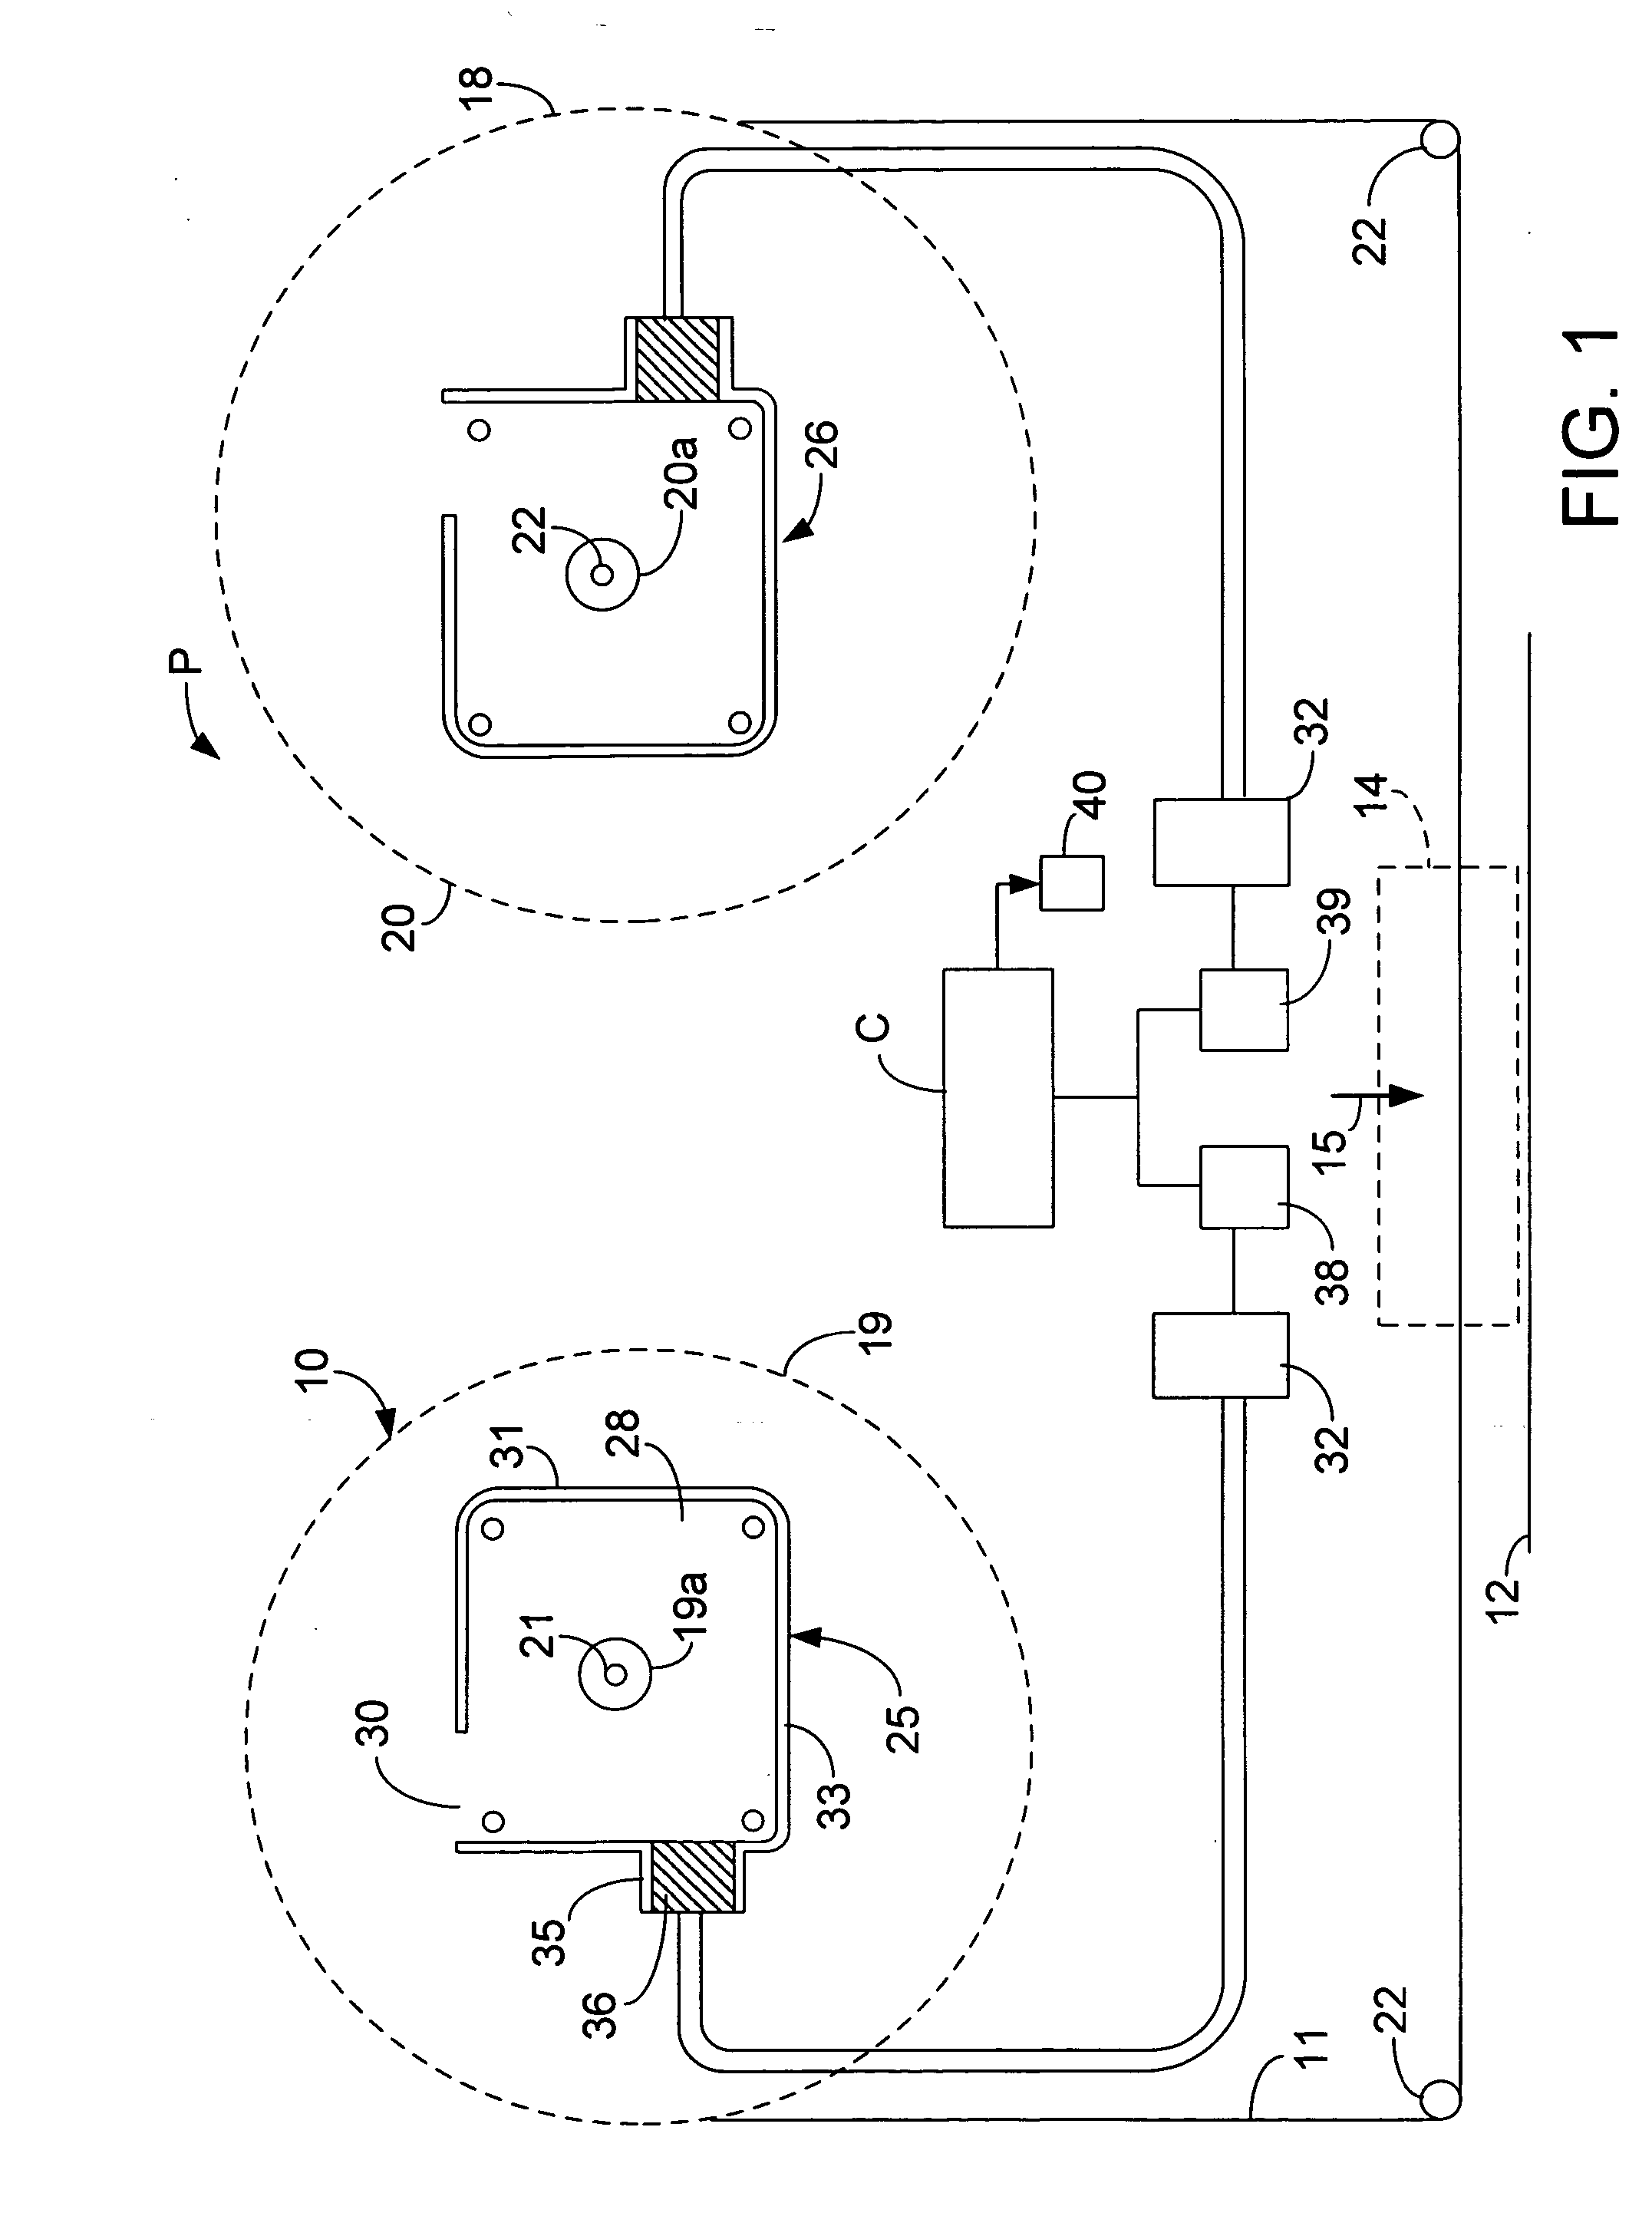 Apparatus for controlling a ribbon transport mechanism